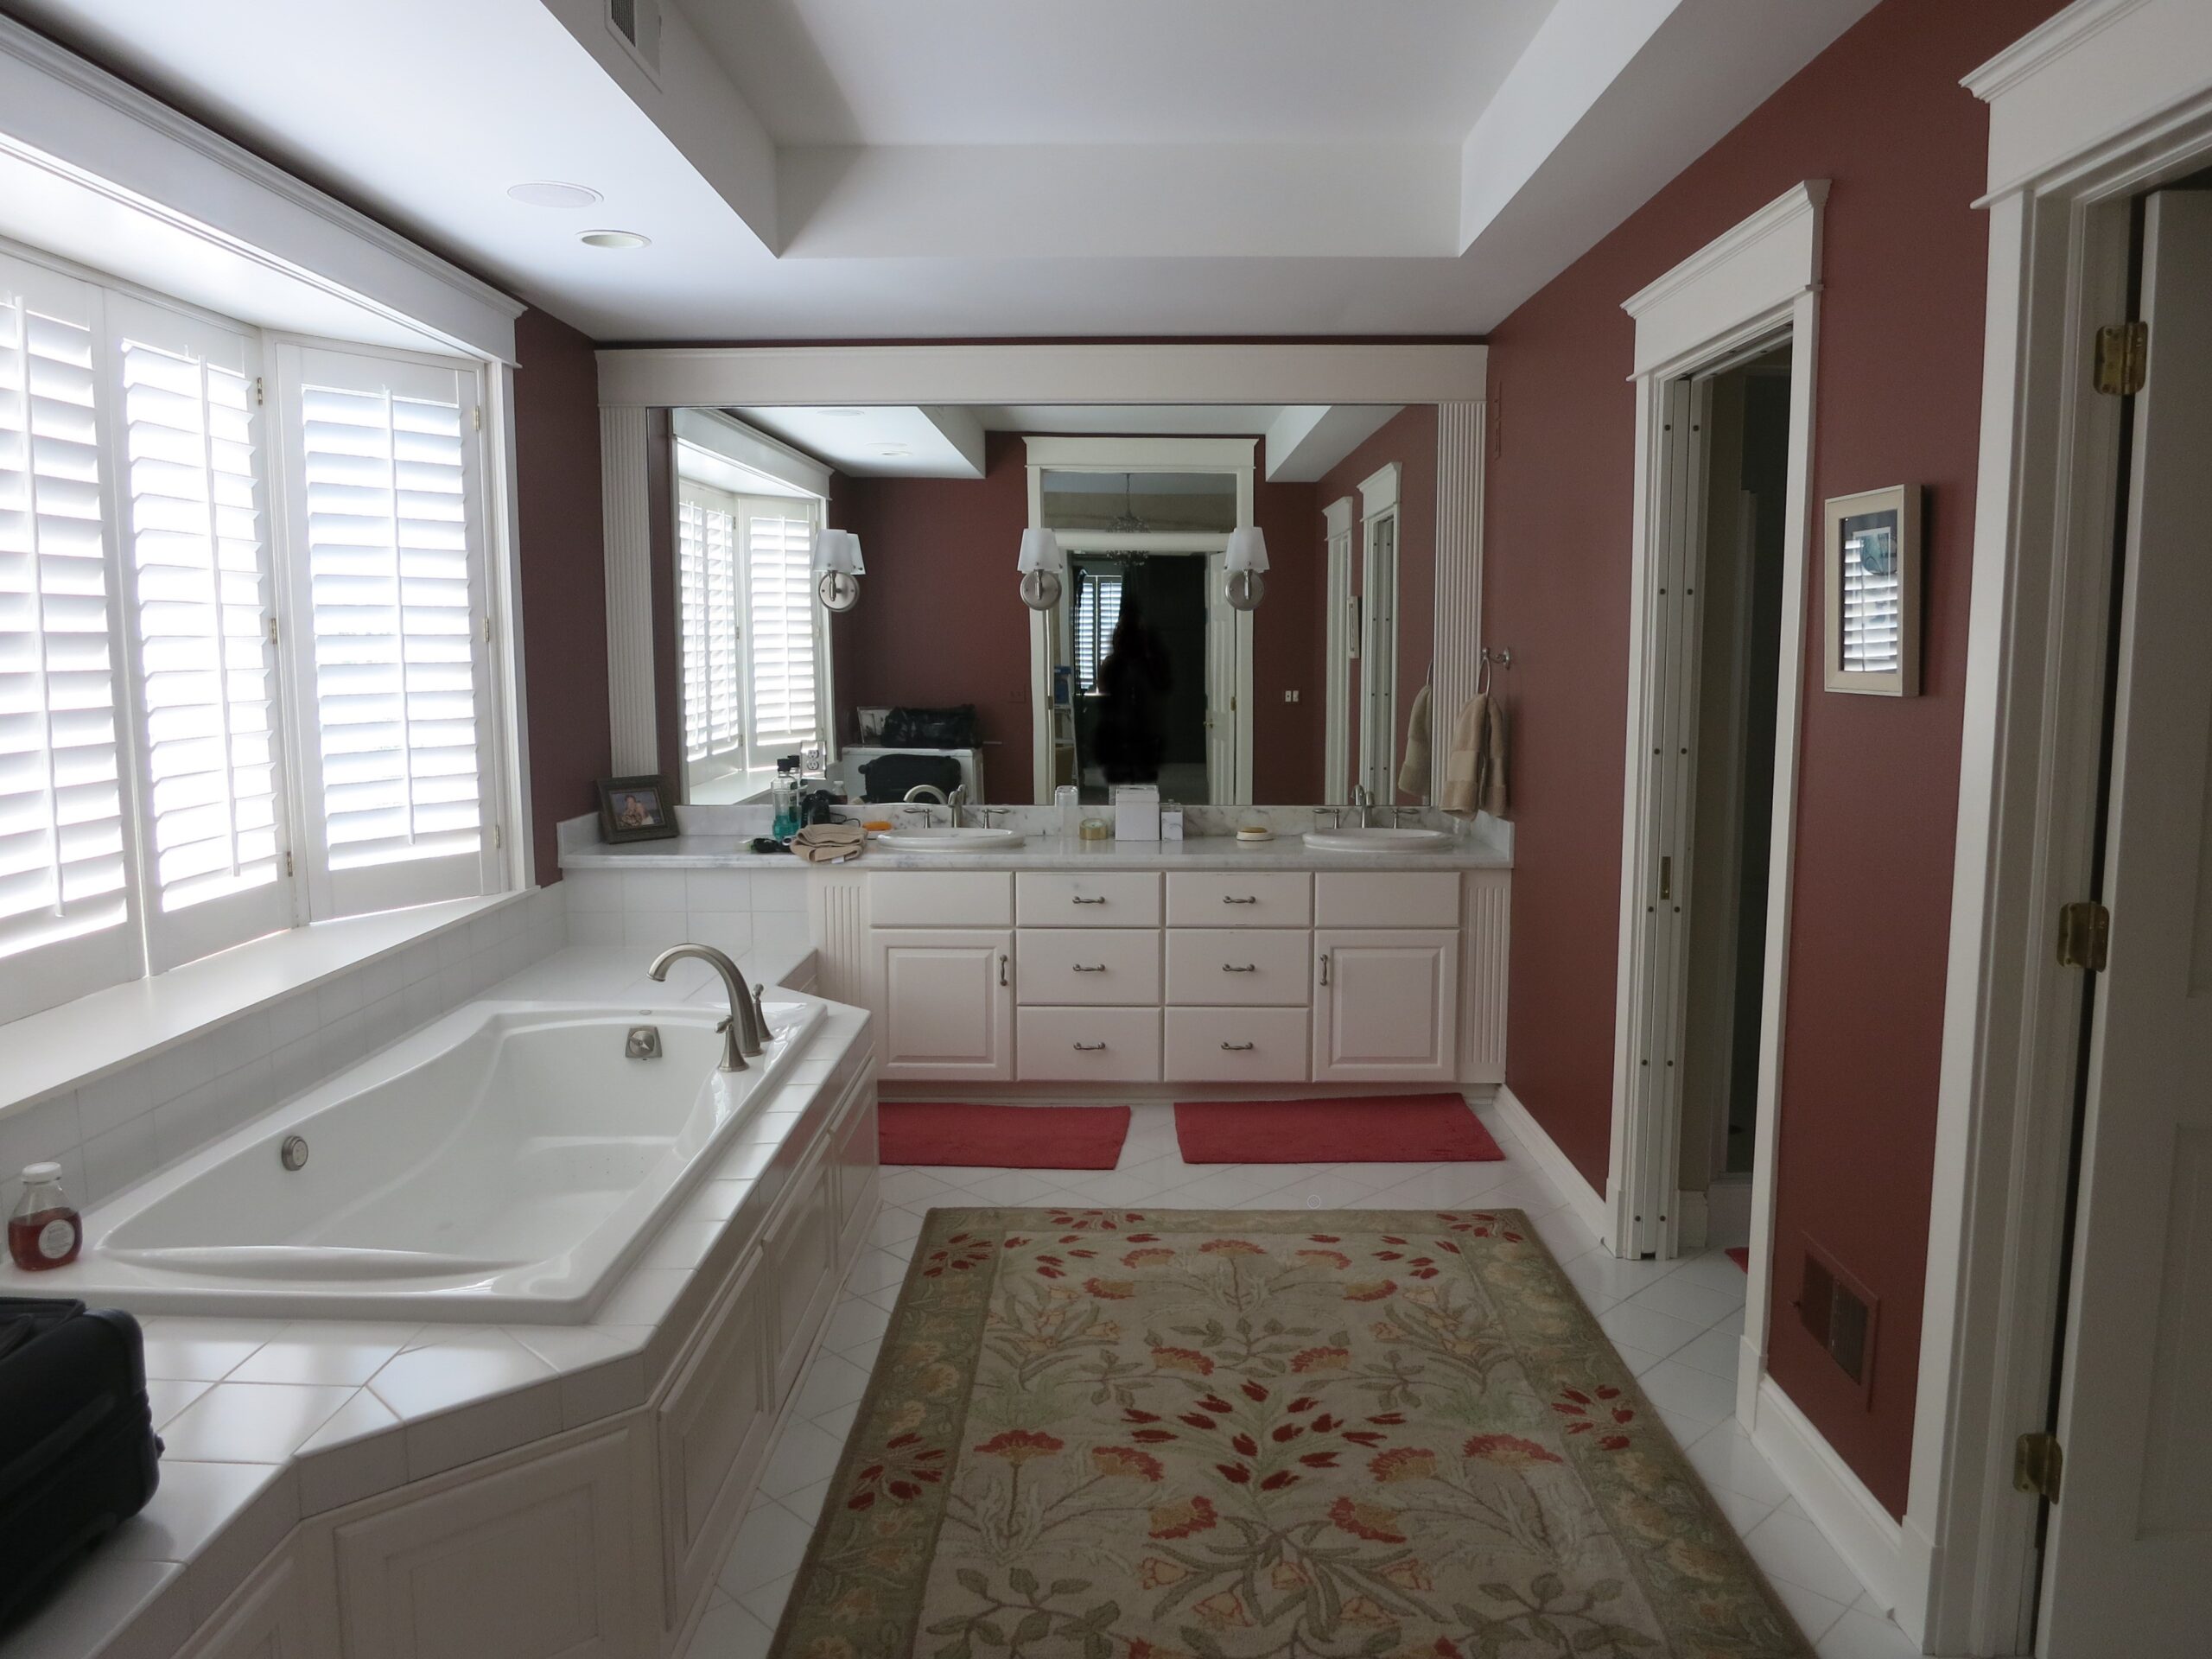 Original bathroom with red walls and outdated features.